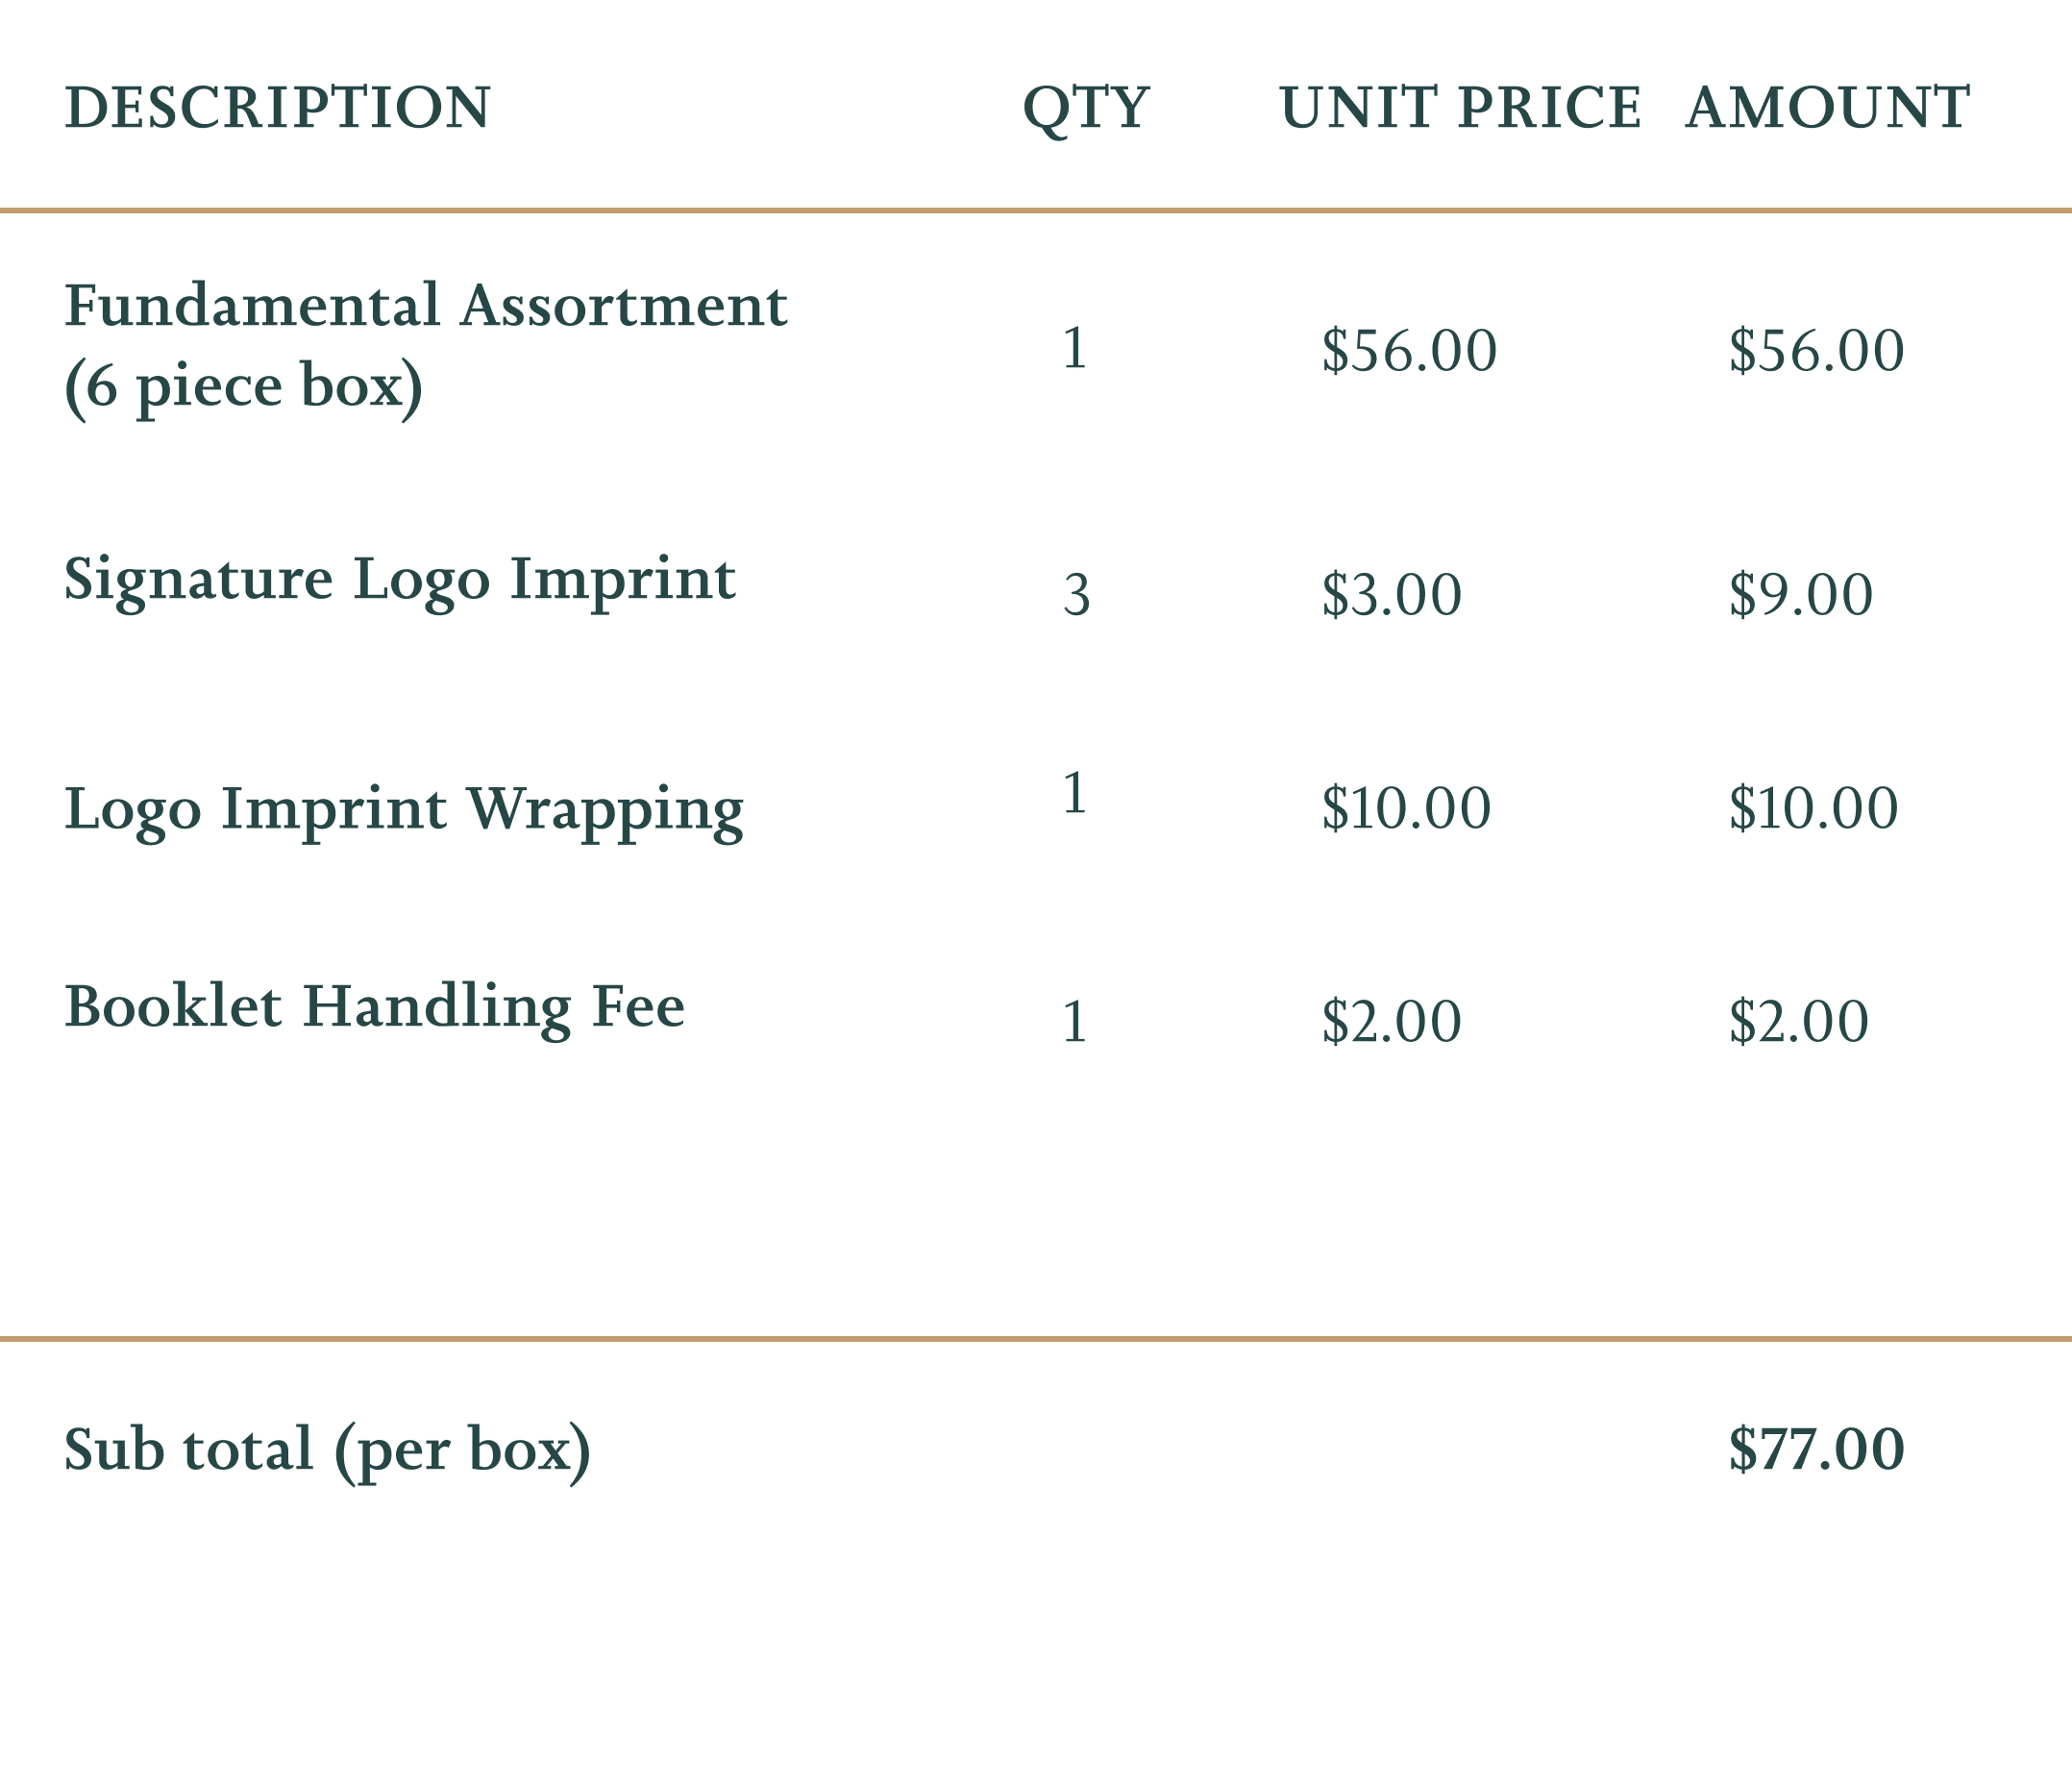 
The image displays an invoice for a 6-piece box of Fundamental Assortment costing $56.00, three Signature Logo Imprints at $3.00 each, Logo Imprint Wrapping for $10.00, and a Booklet Handling Fee of $2.00, with a subtotal of $77.00 per box.